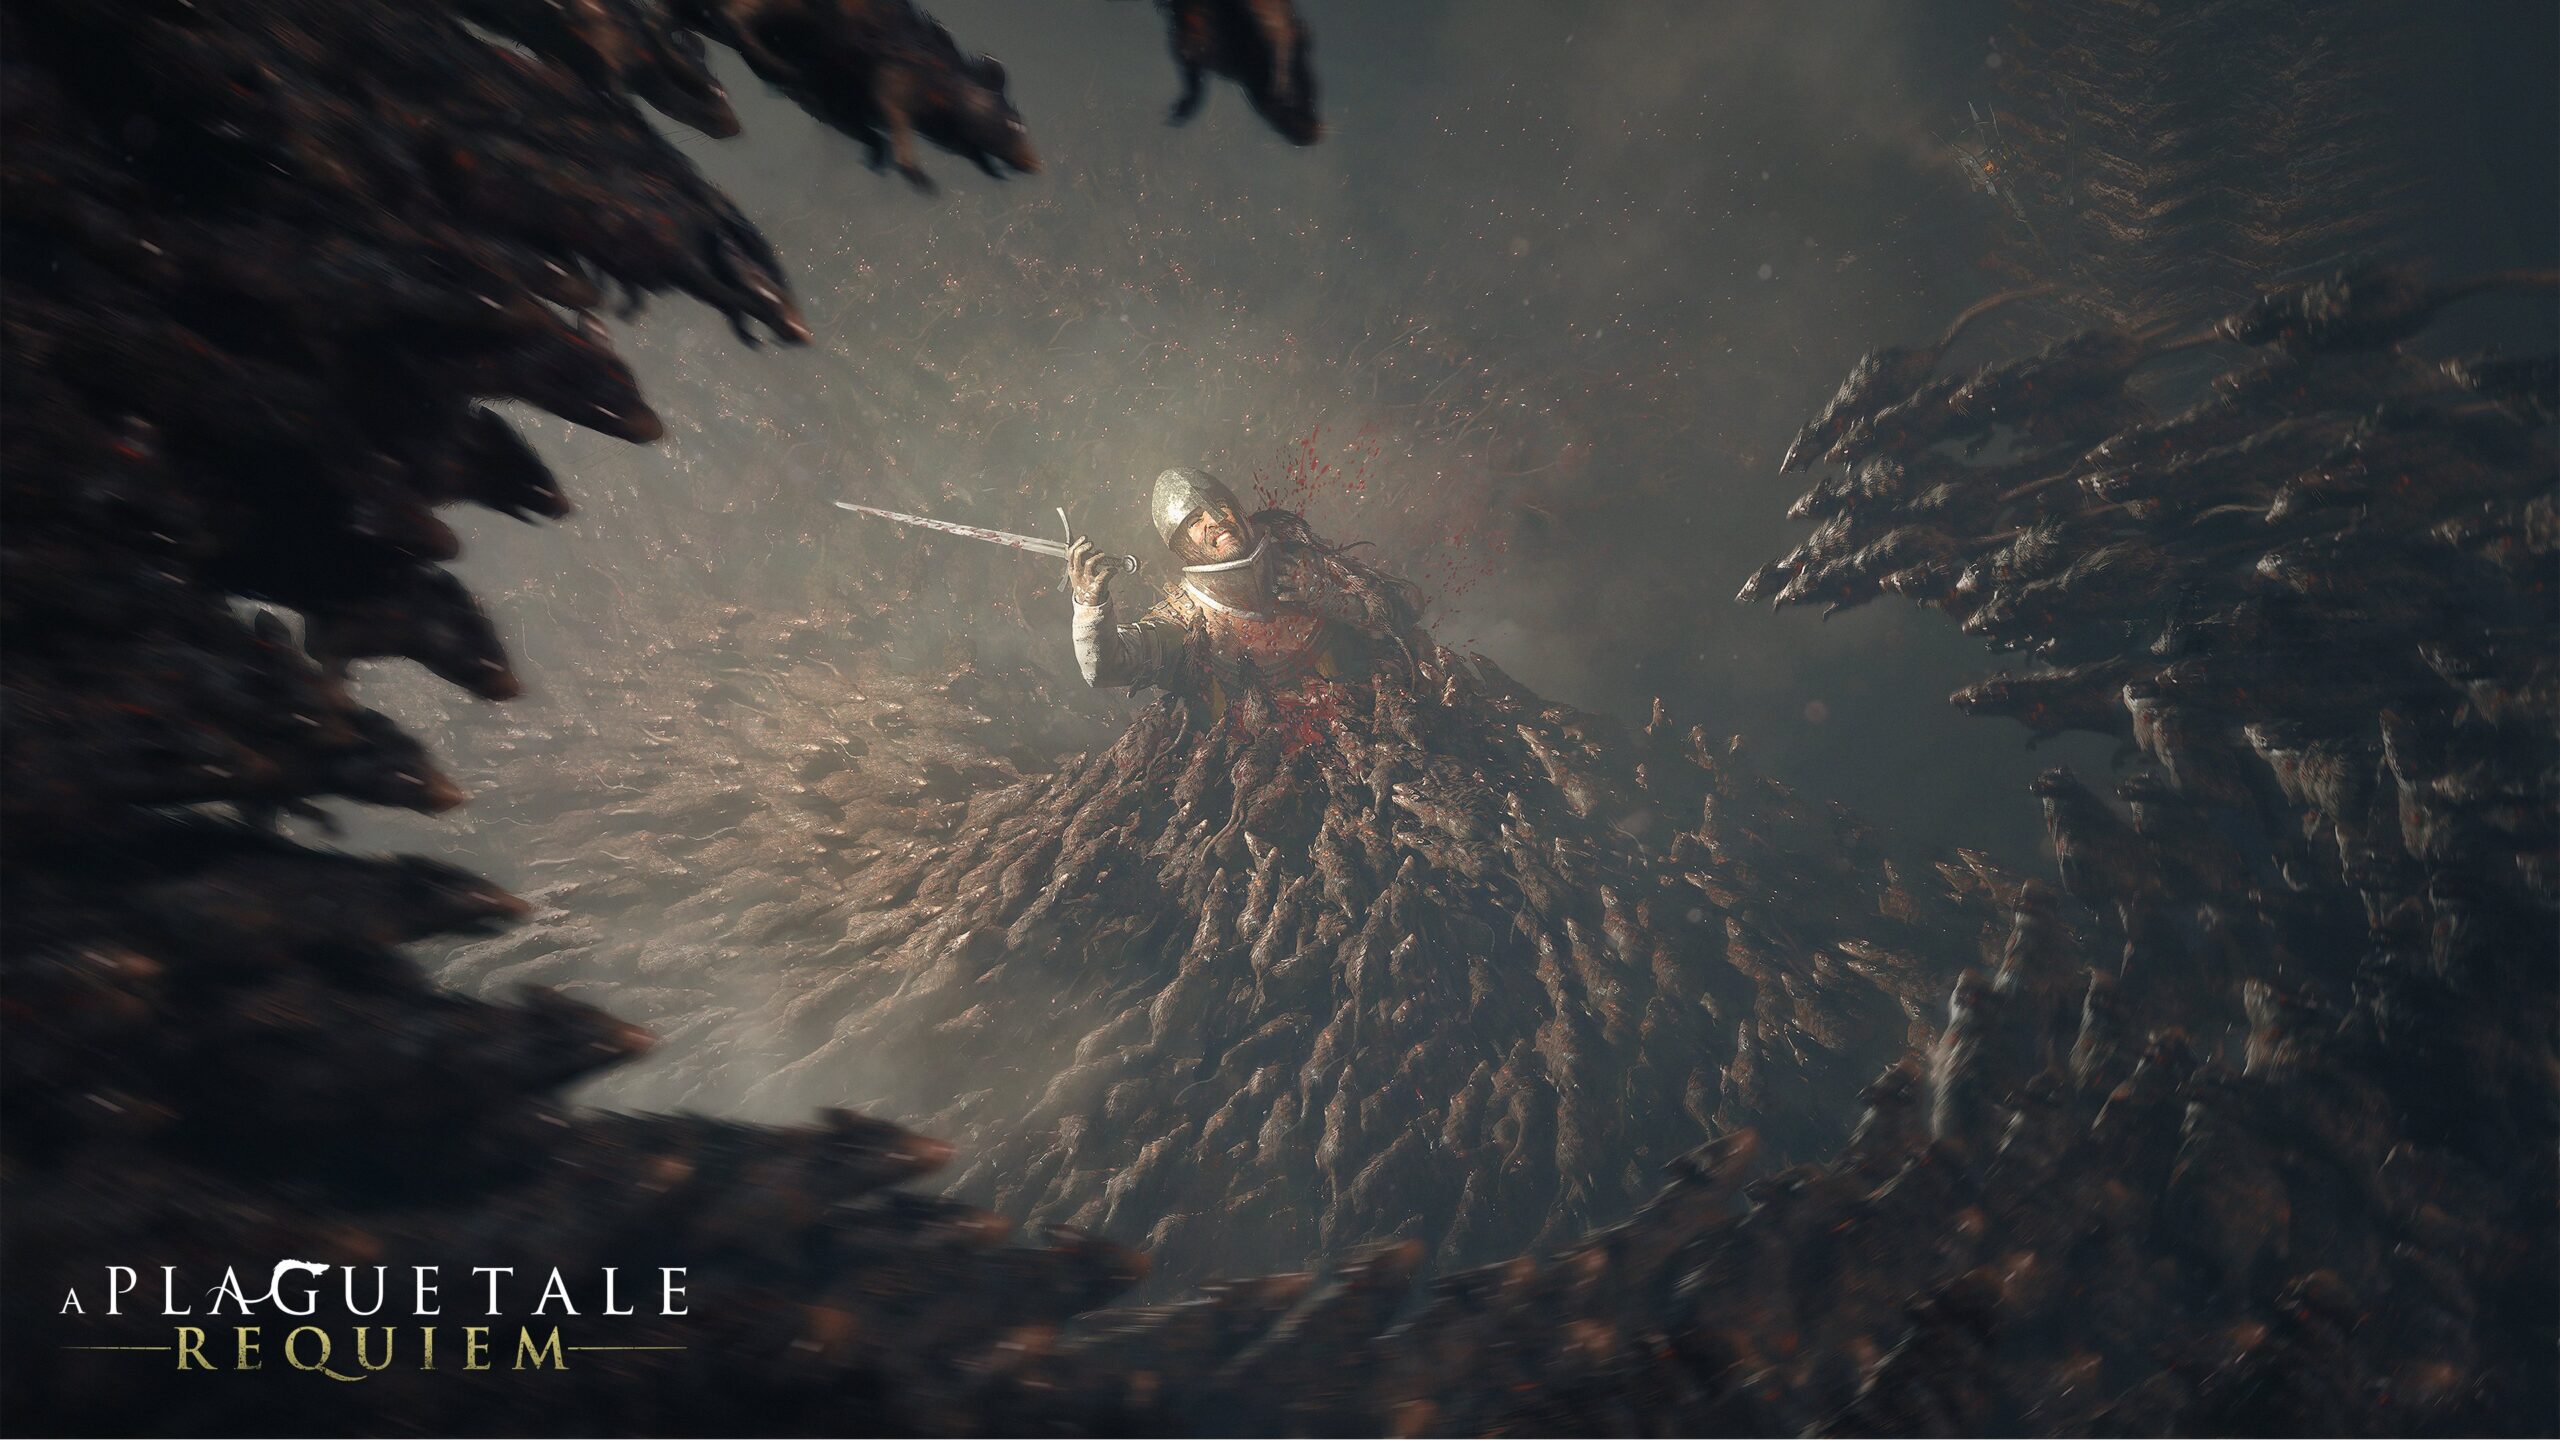 Spoilers at A Plague Tale: Requiem - Developers Severely Warning [Update]